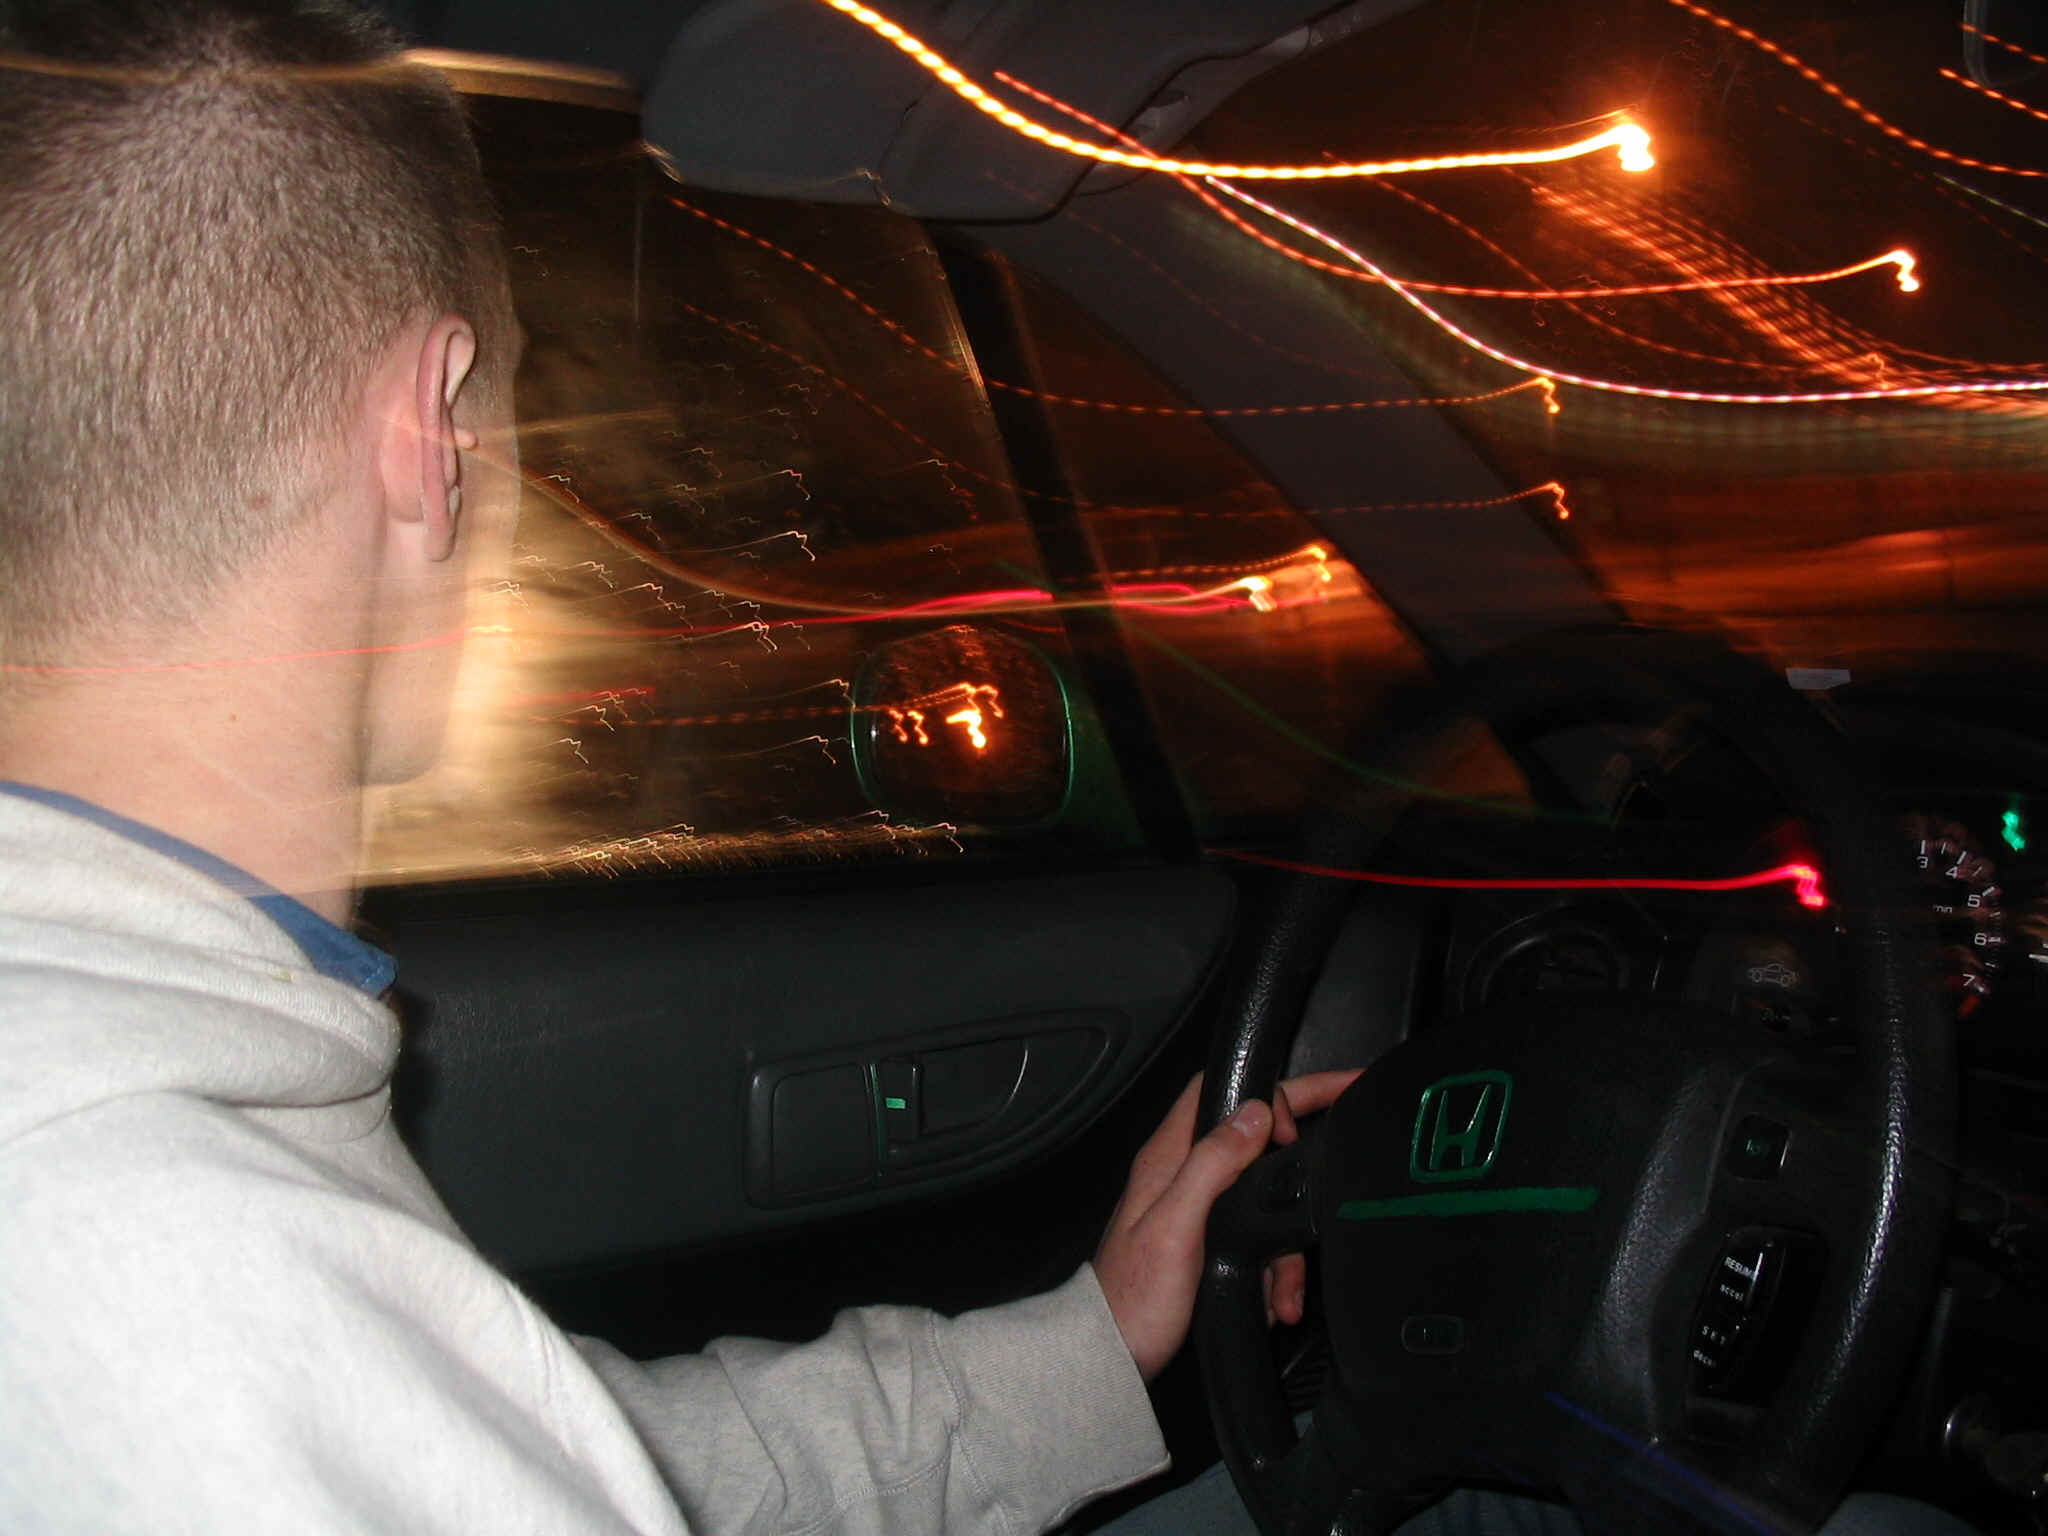 Steven driving(and the lights look really cool).jpg (639477 bytes)